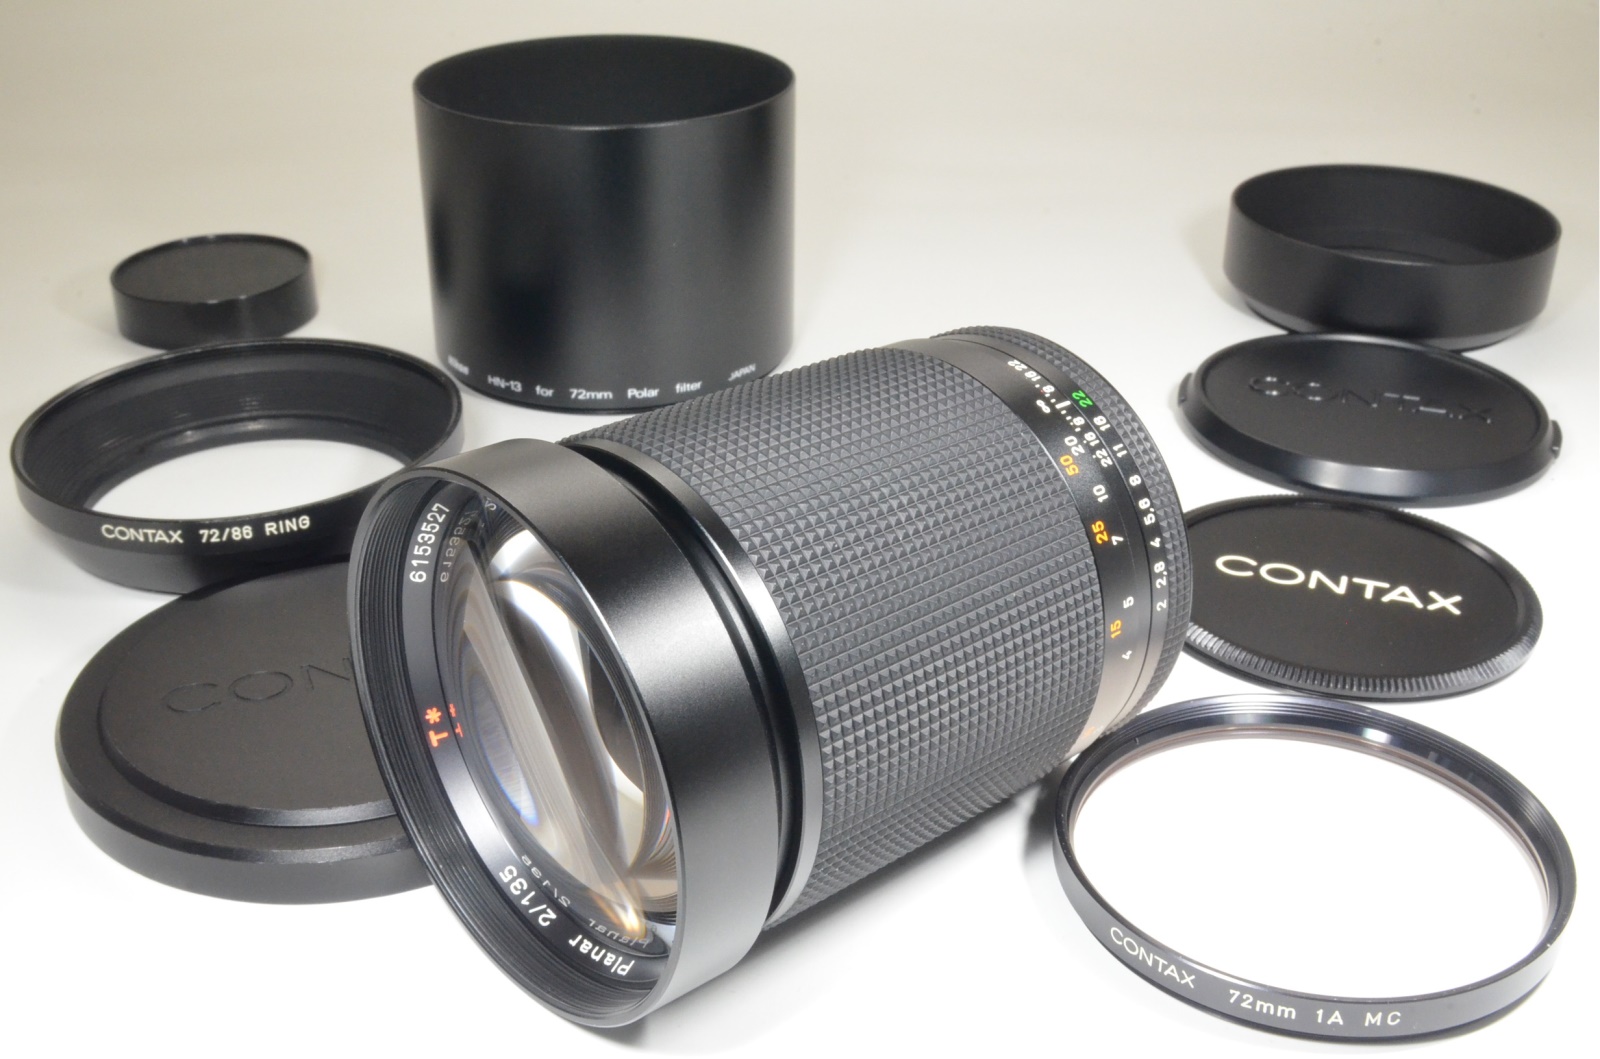 CONTAX Carl Zeiss Planar T* 135mm f2 MMG West Germany with 2 Lens Hoods